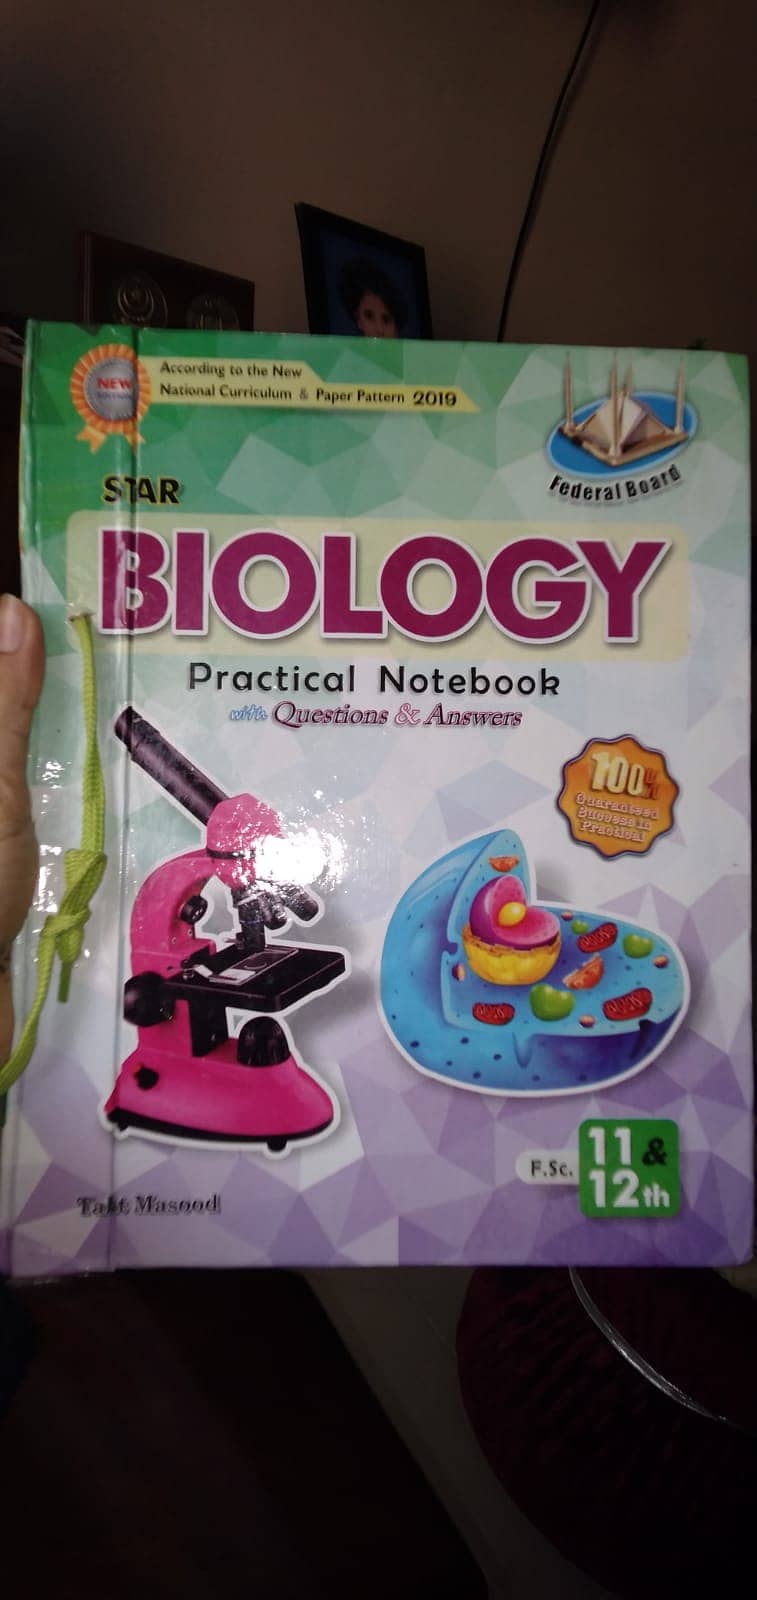 Star biology practical notebook for 11 and 12th federal board 0